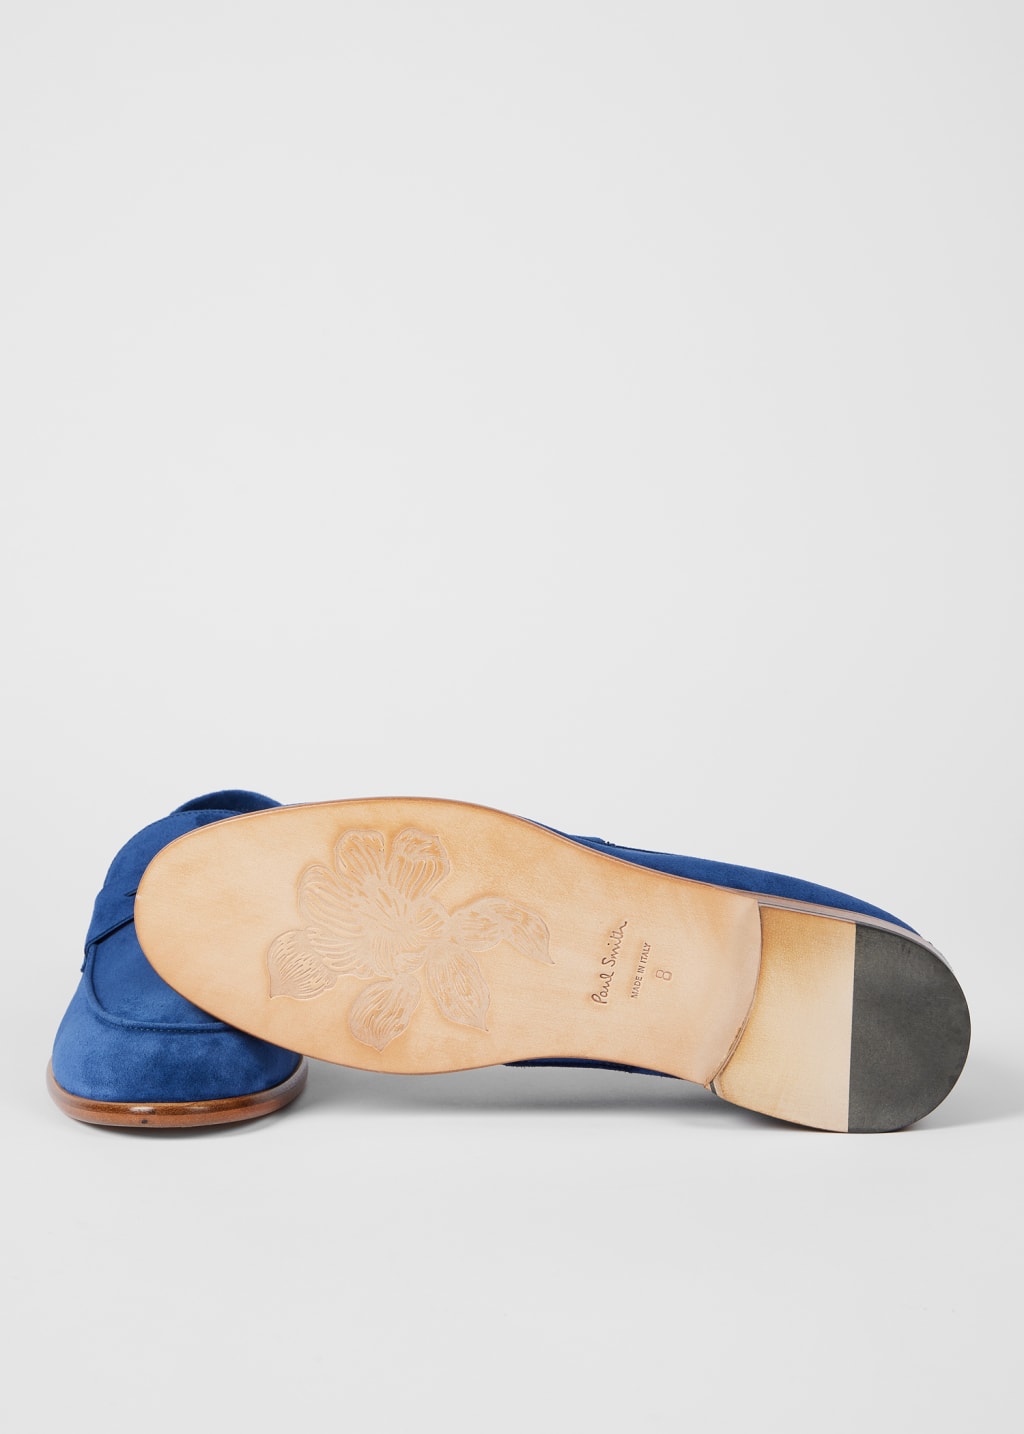 Detail View - Blue Suede 'Figaro' Loafers Paul Smith